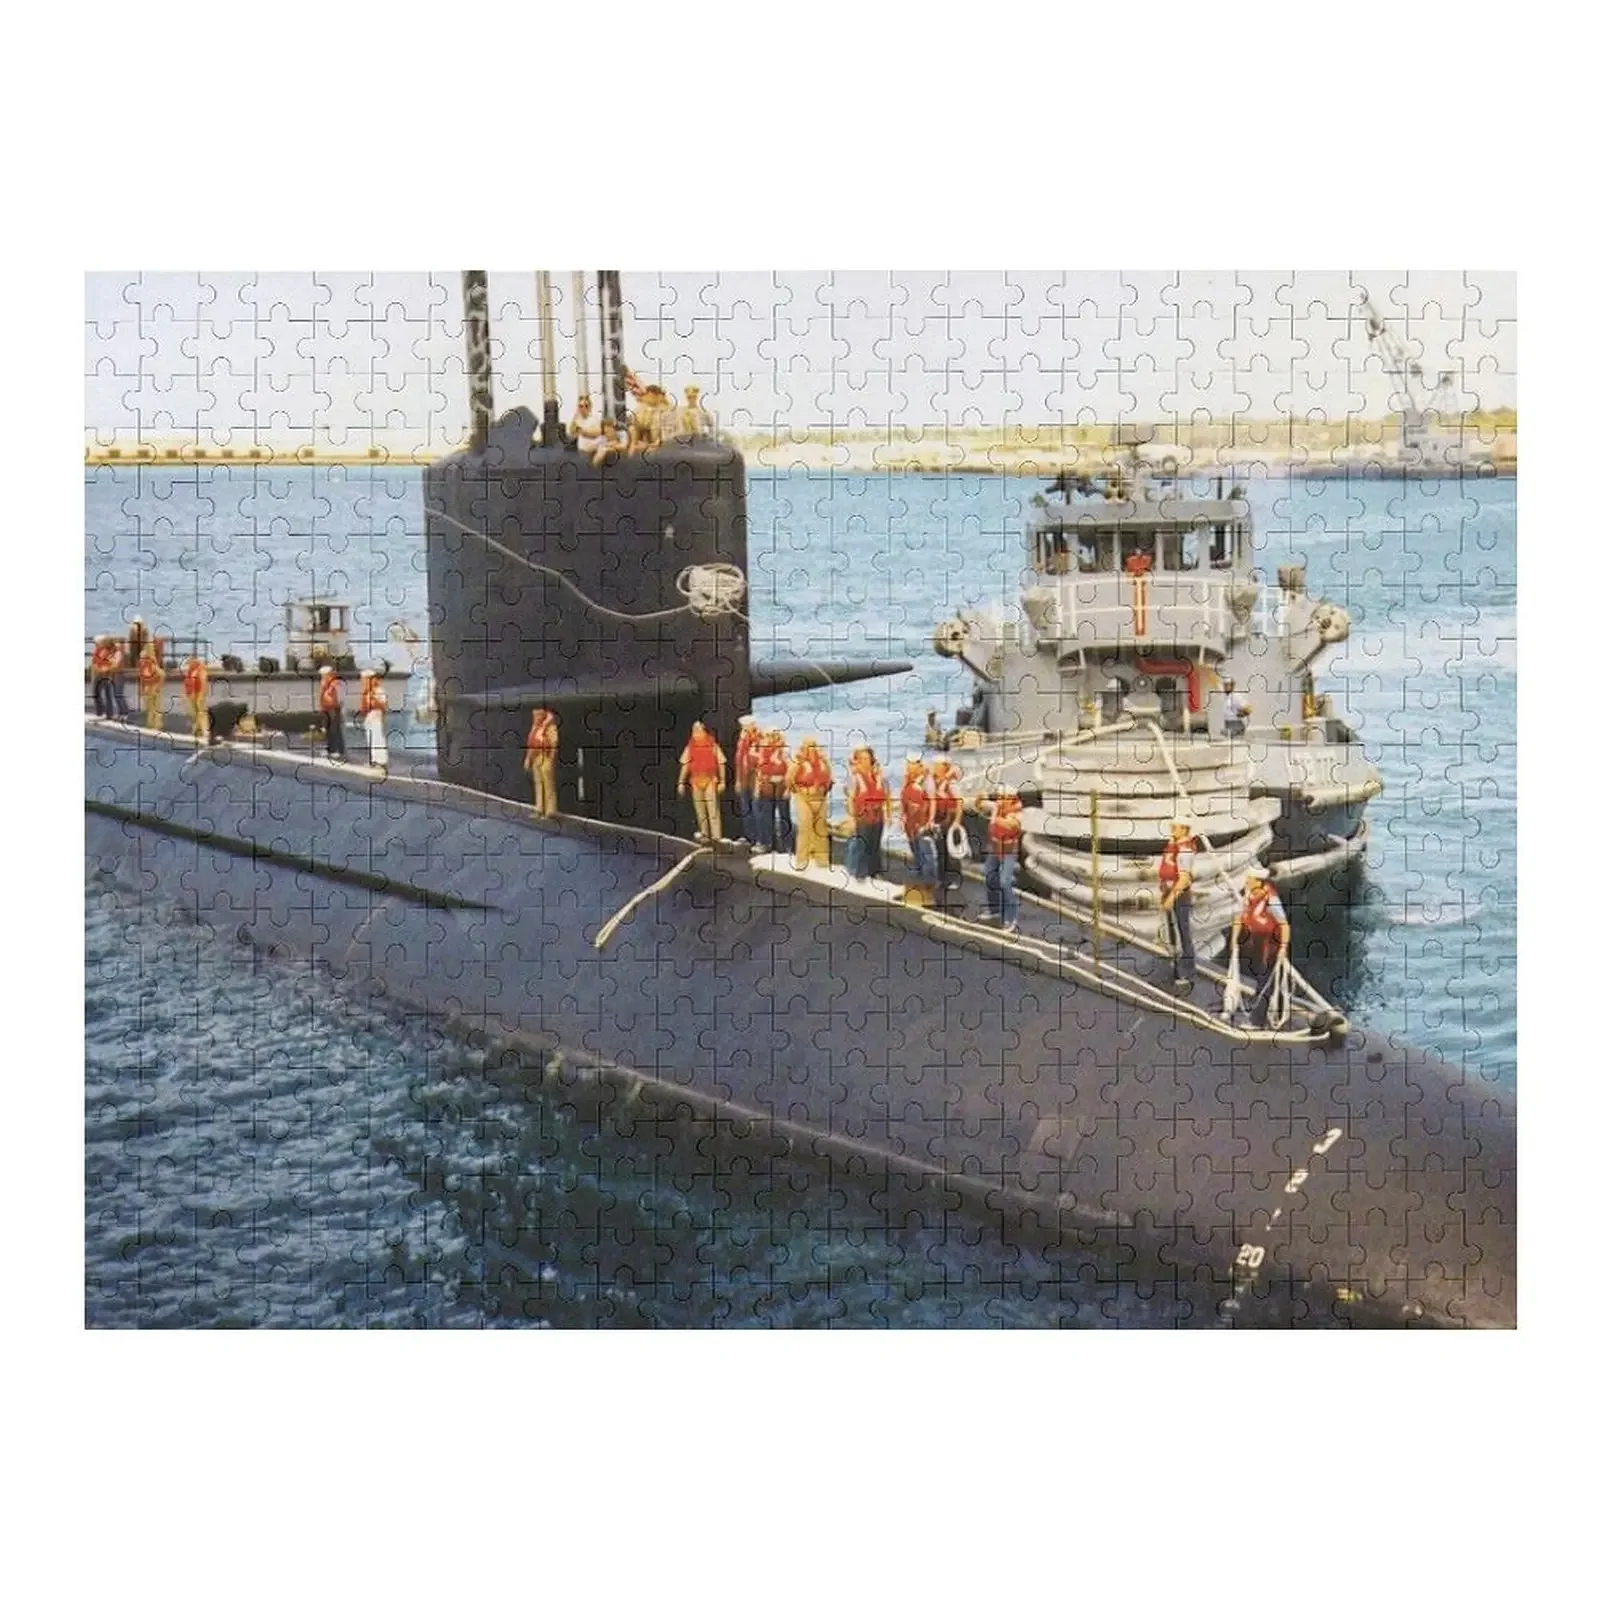 USS BARBEL (SS-580) SHIP'S STORE Jigsaw Puzzle Wood Animals Personalized Name Puzzle